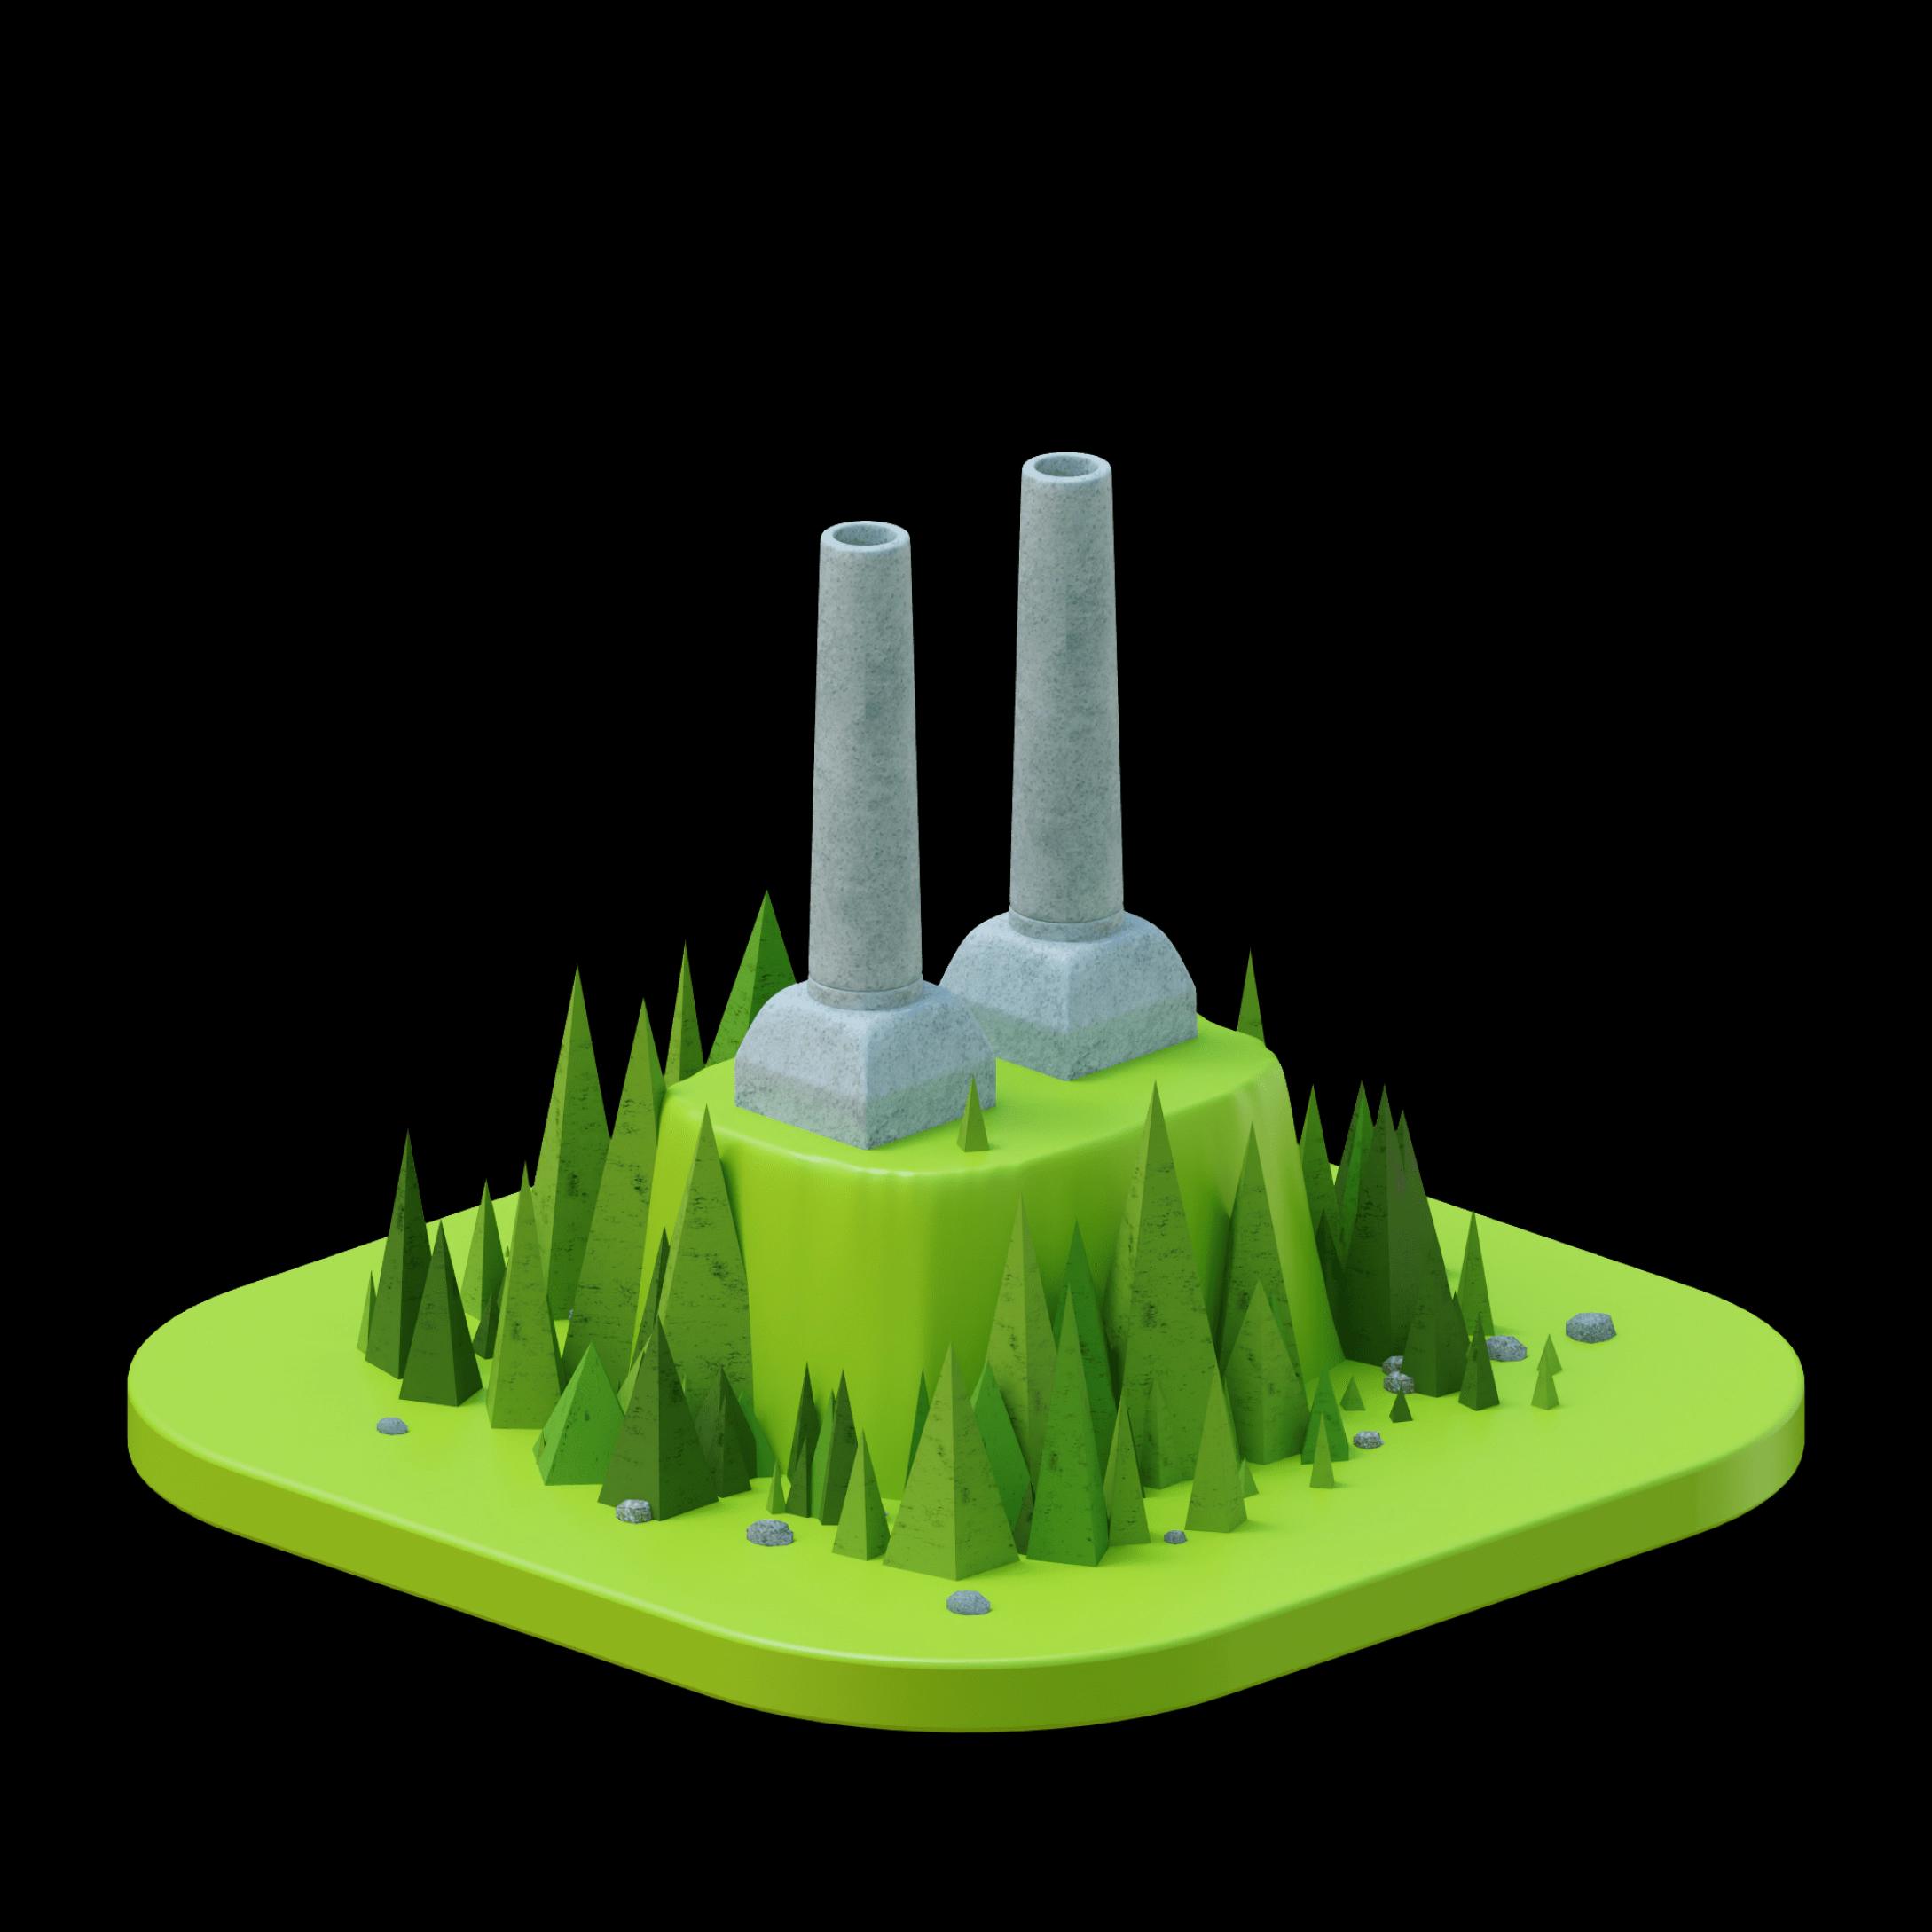 A small 3d model of a bioenergy plant with a biomass boiler, turbine and generator